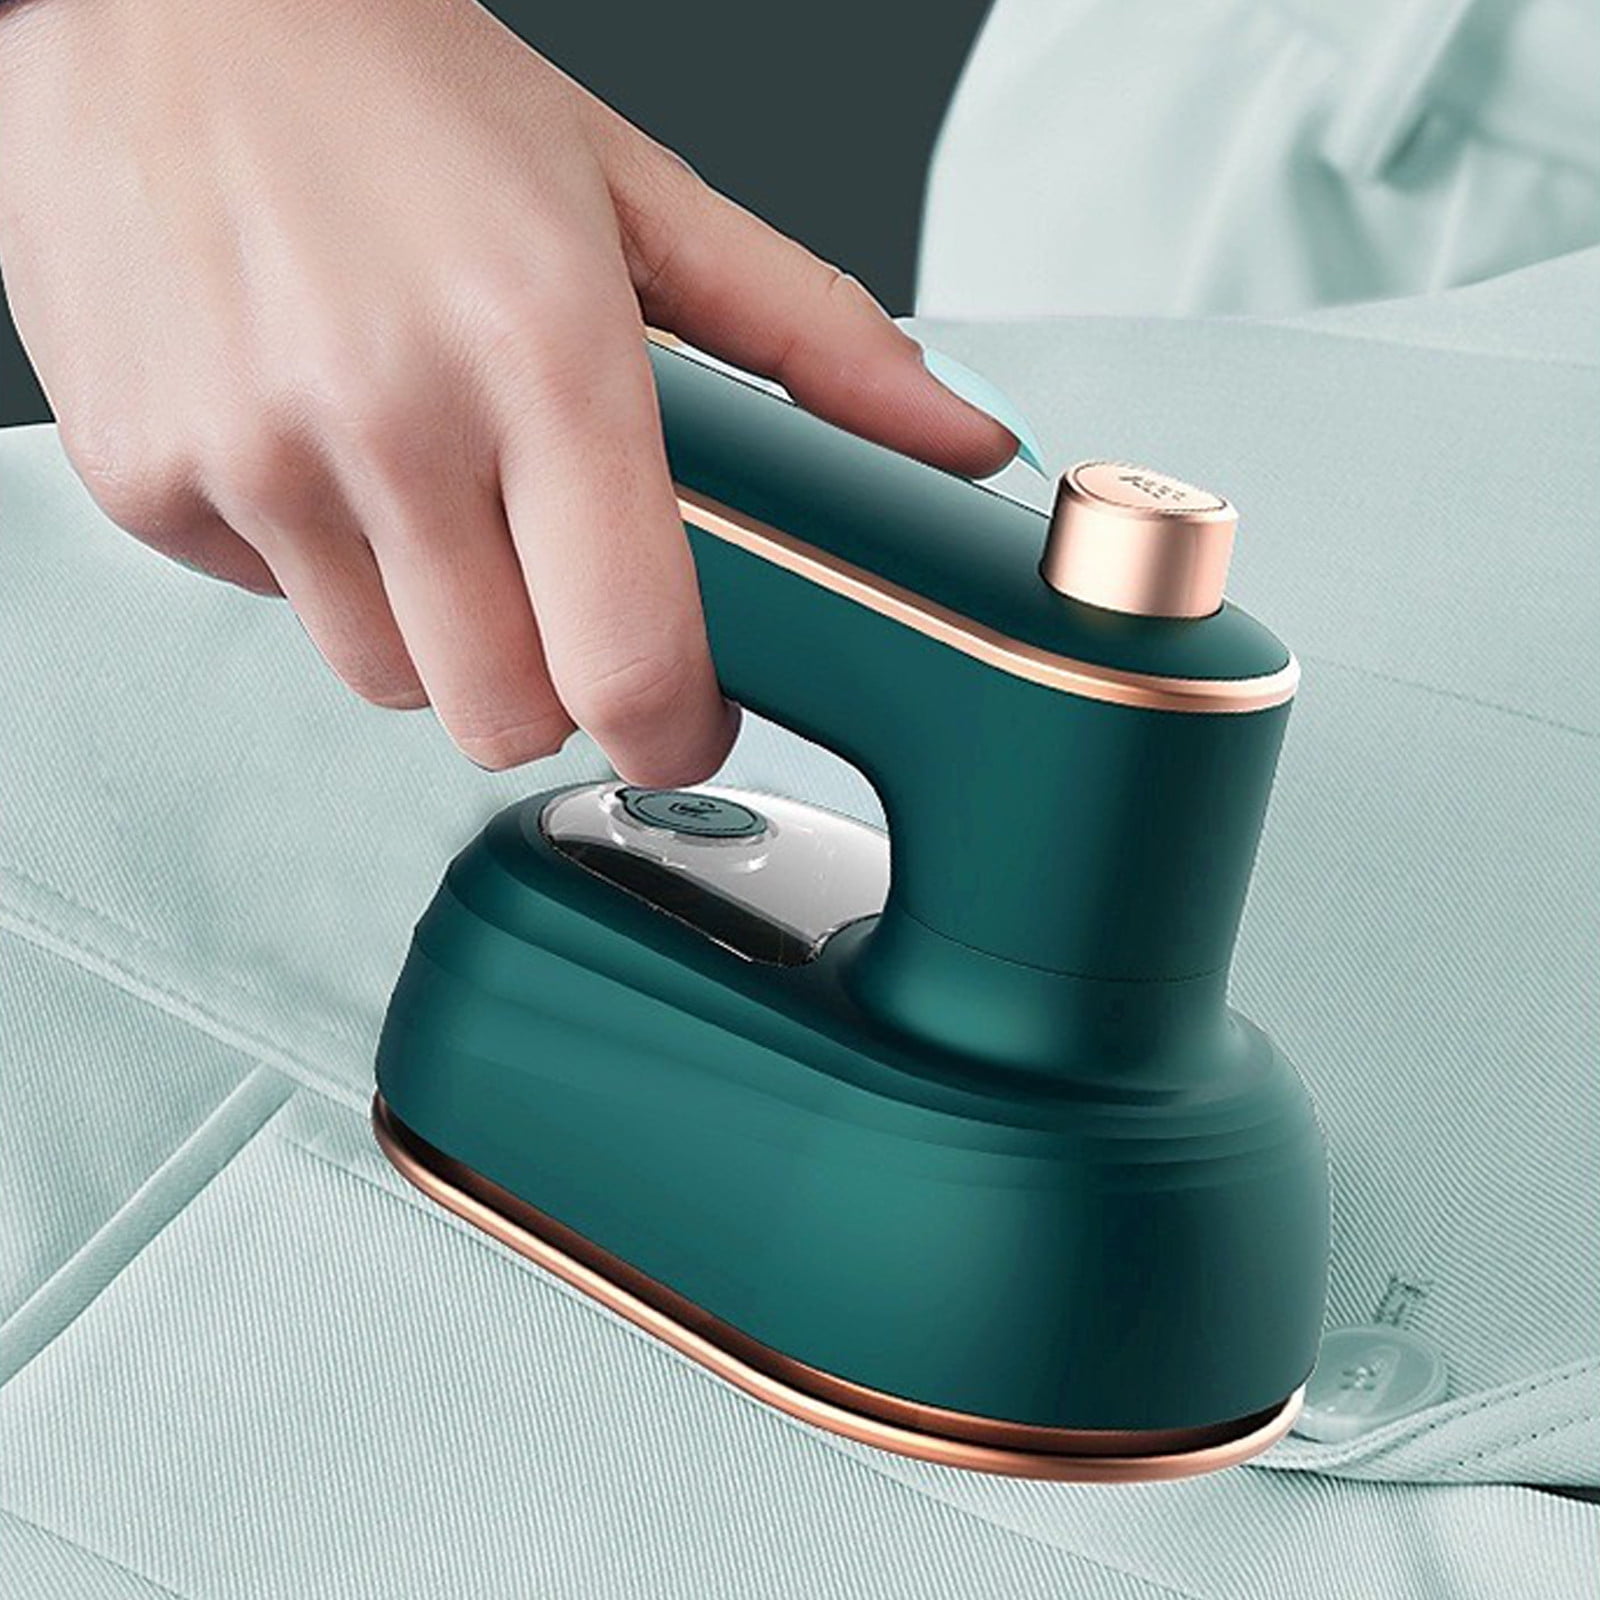  Mini Iron for Clothes, Portable Travel Iron Support